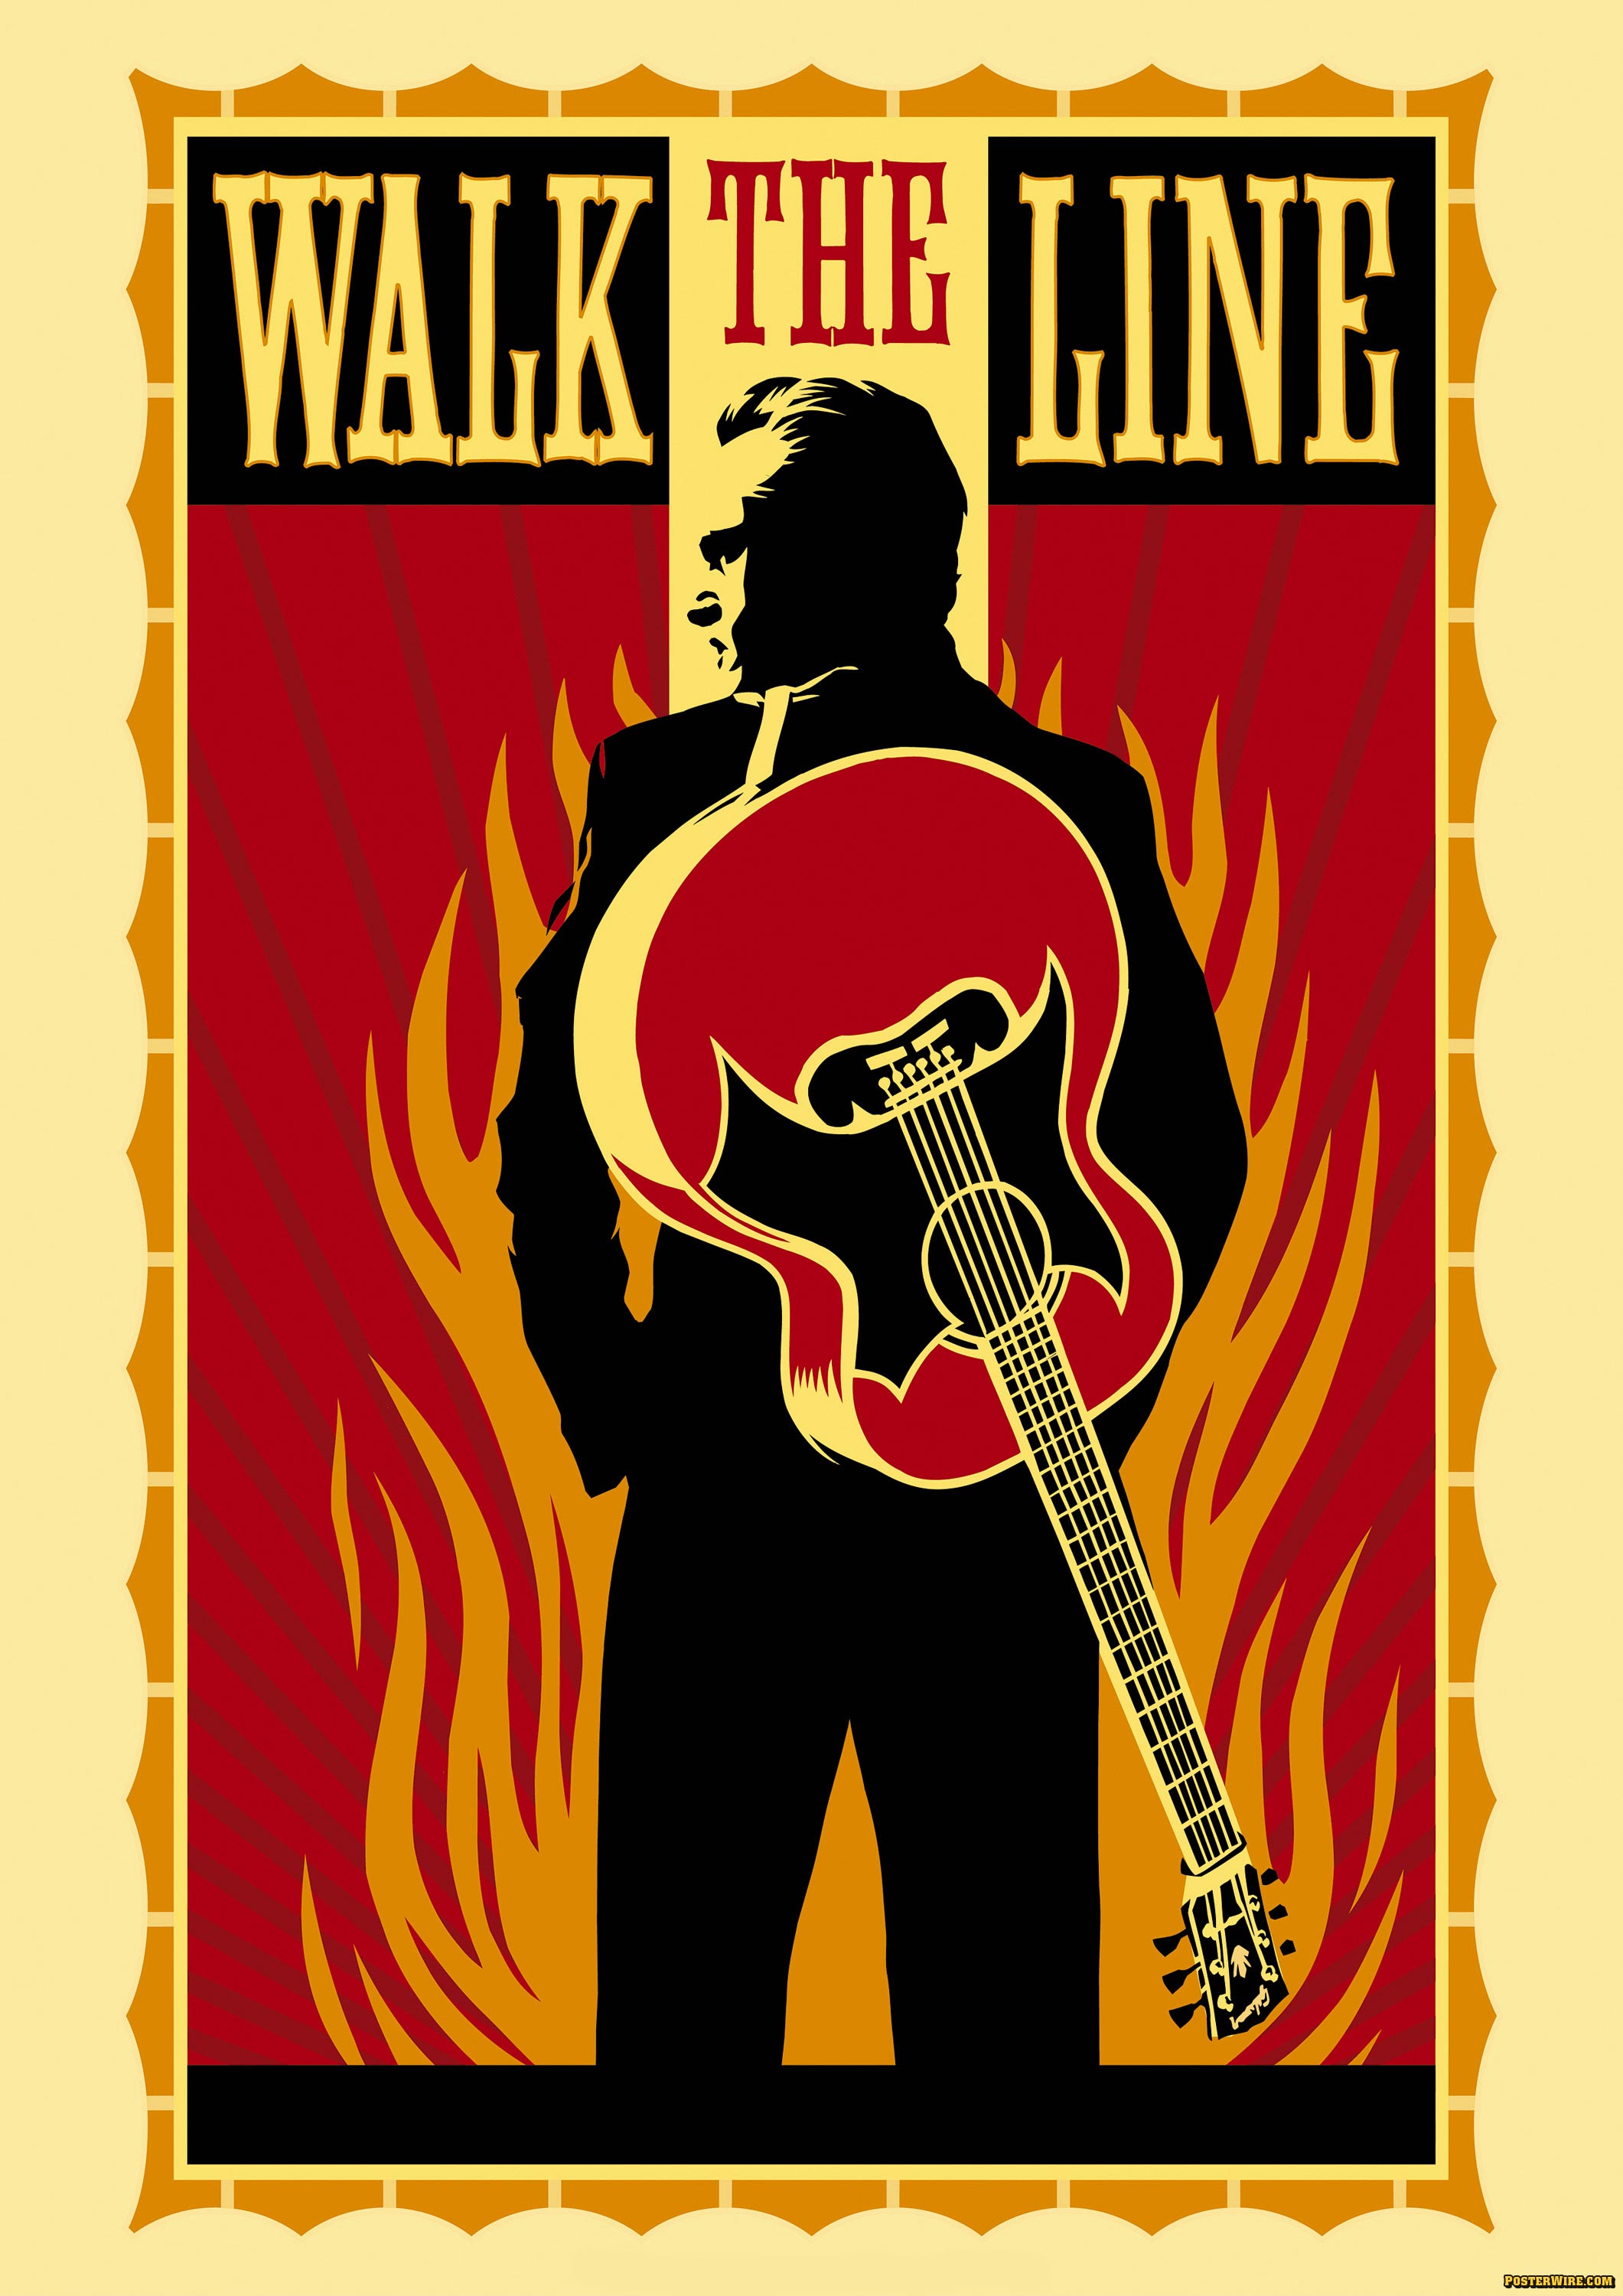 Walk the Line movie poster